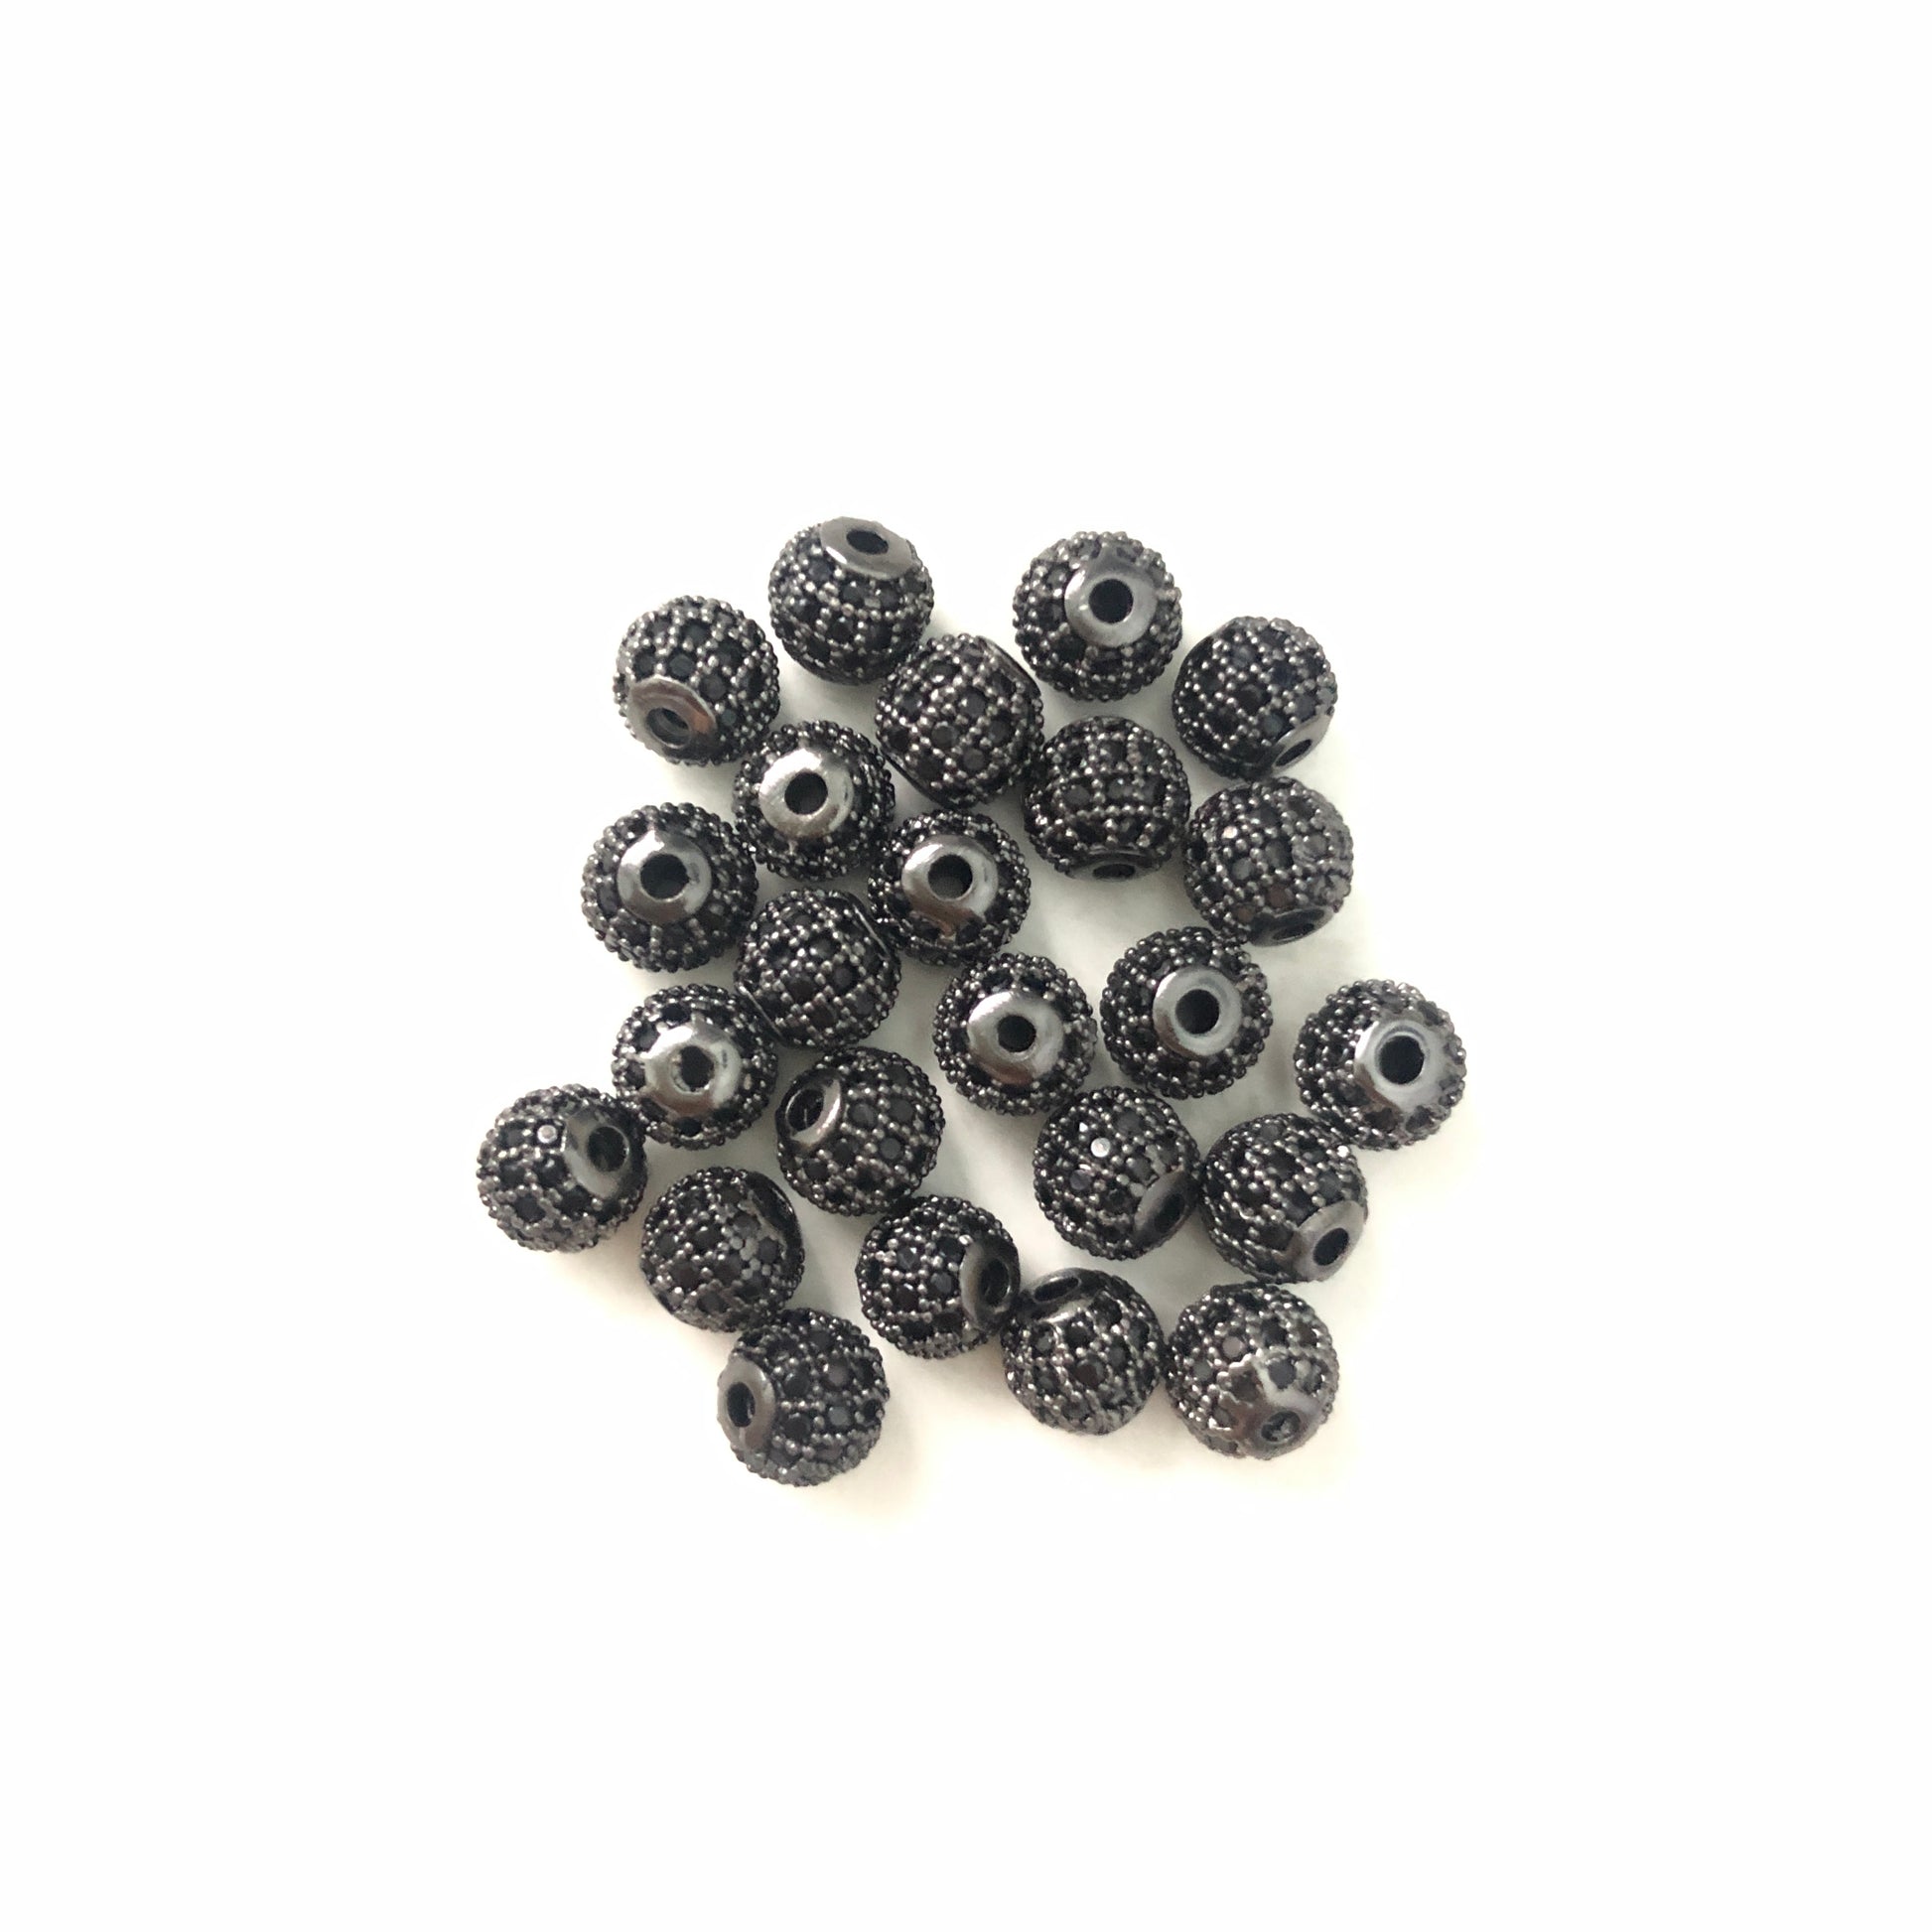 20pcs/lot 6mm Clear CZ Paved Ball Spacers Black on Black CZ Paved Spacers 6mm Beads Ball Beads Charms Beads Beyond